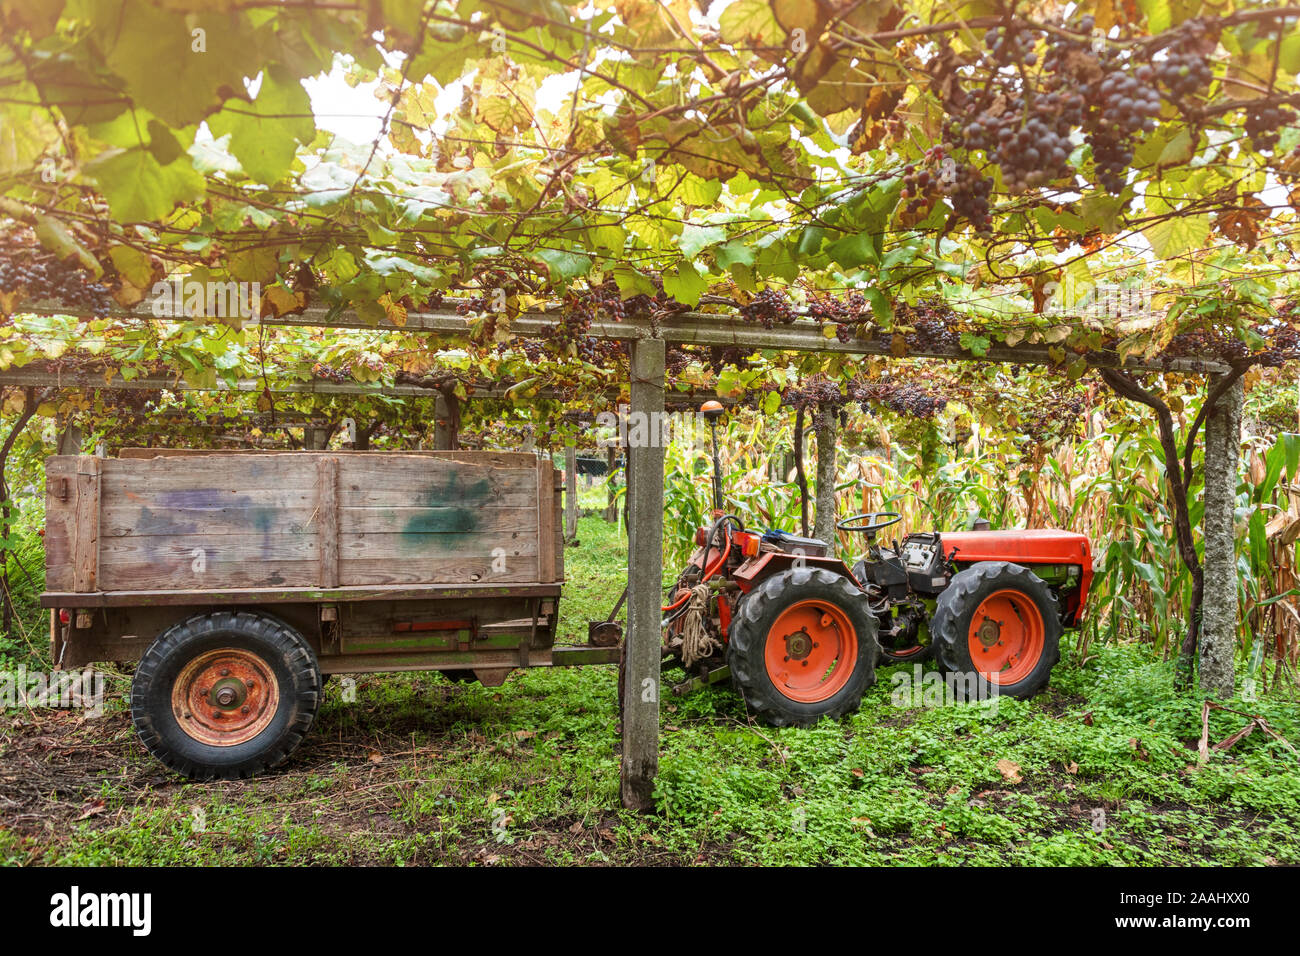 Tractor in the vineyard. Winery Harvest. Grape picker truck transporting grapes from vineyard to wine manufacturer Stock Photo